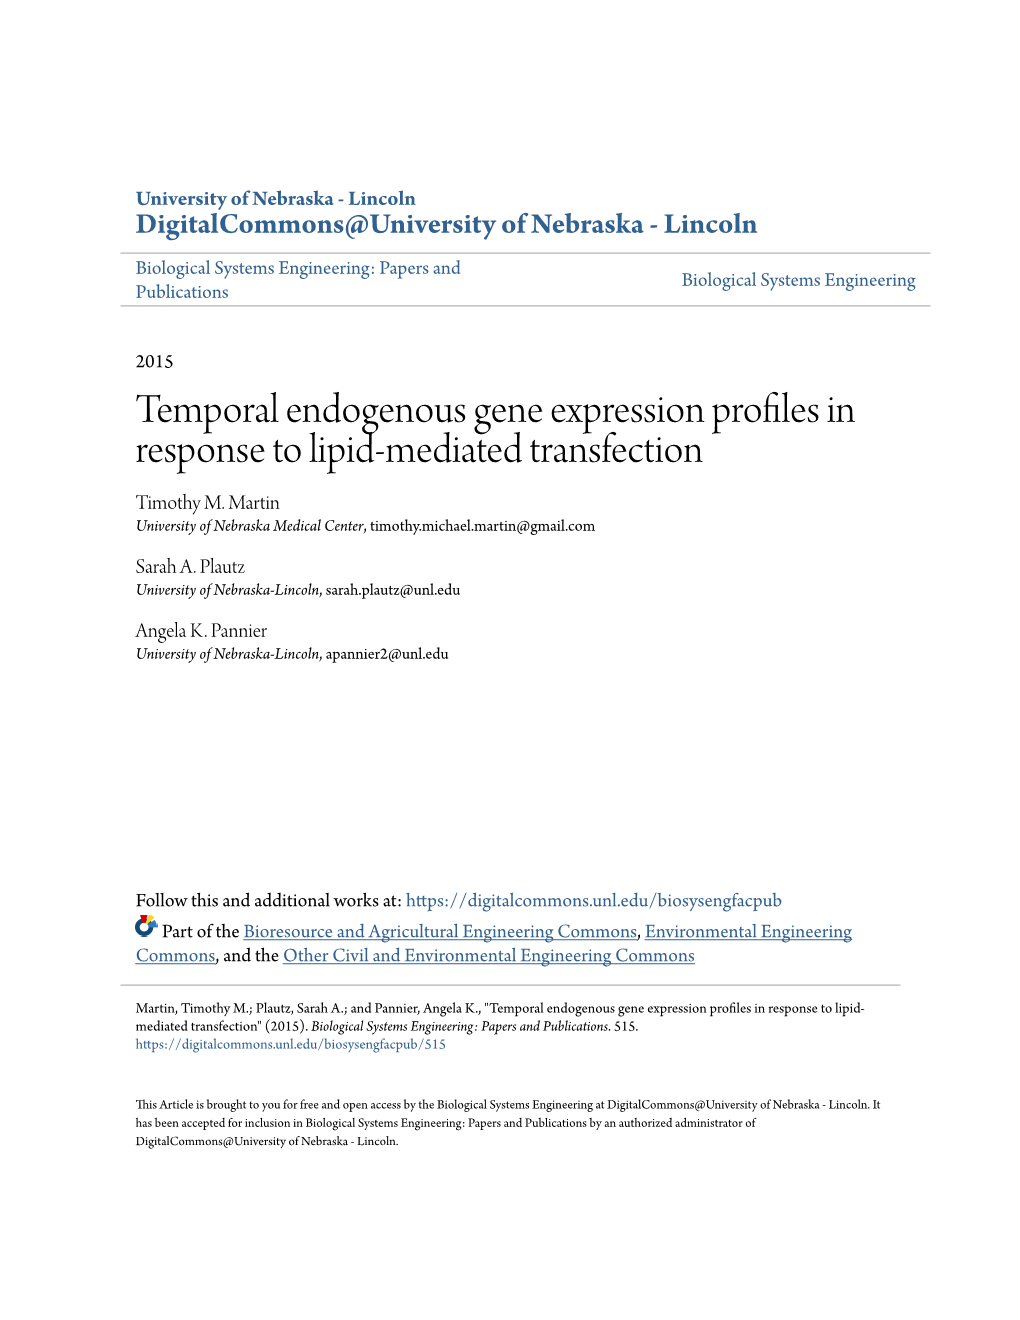 Temporal Endogenous Gene Expression Profiles in Response to Lipid-Mediated Transfection Timothy M